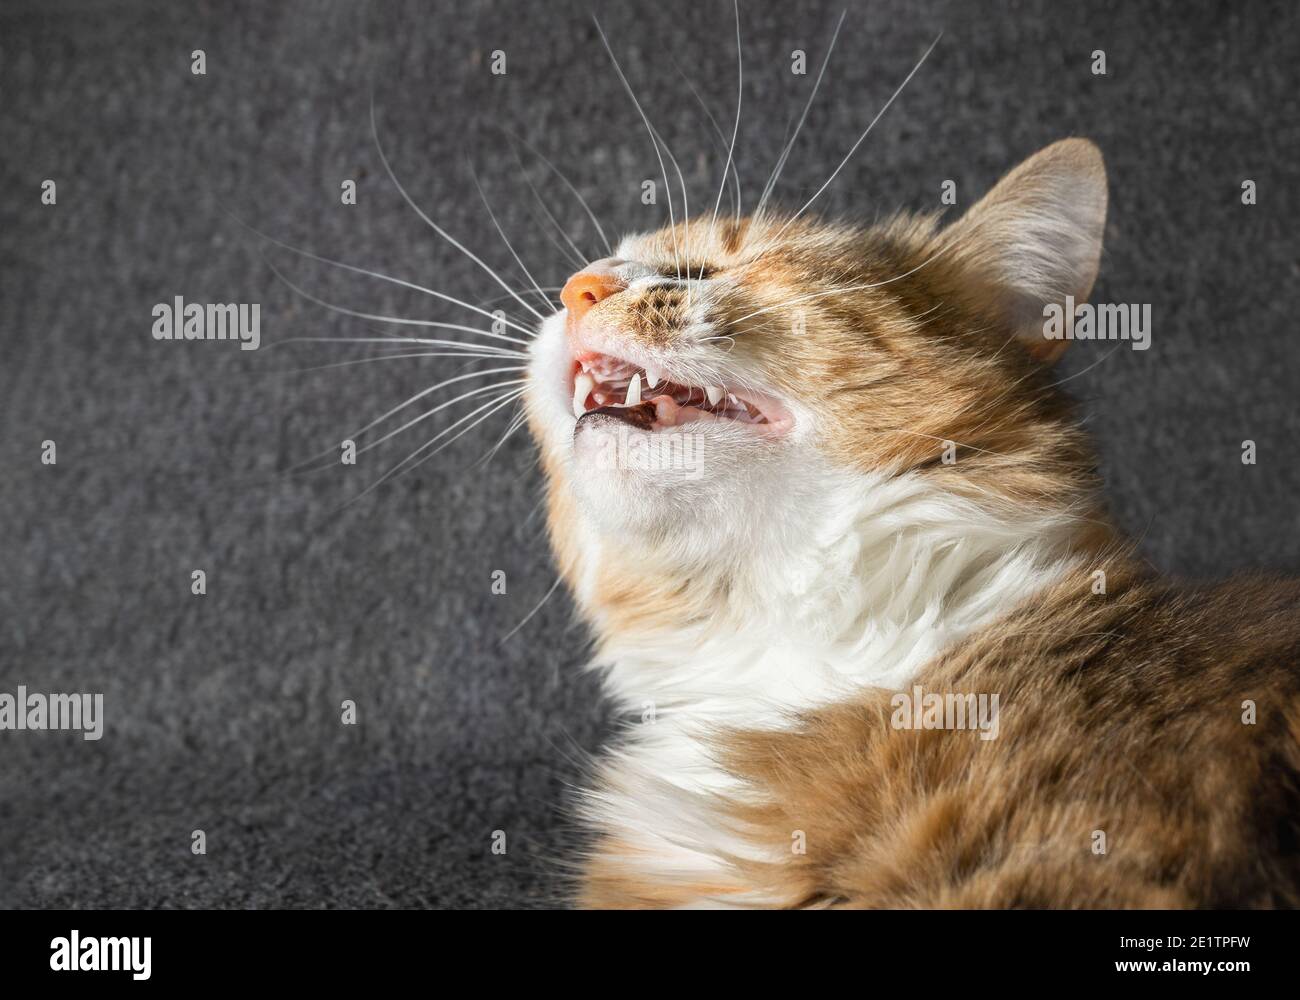 Sneezing cat, side portrait. Cat head is tilted upwards with open mouth and visible teeth. Concept for infections in pets, signs of sickness in pets o Stock Photo